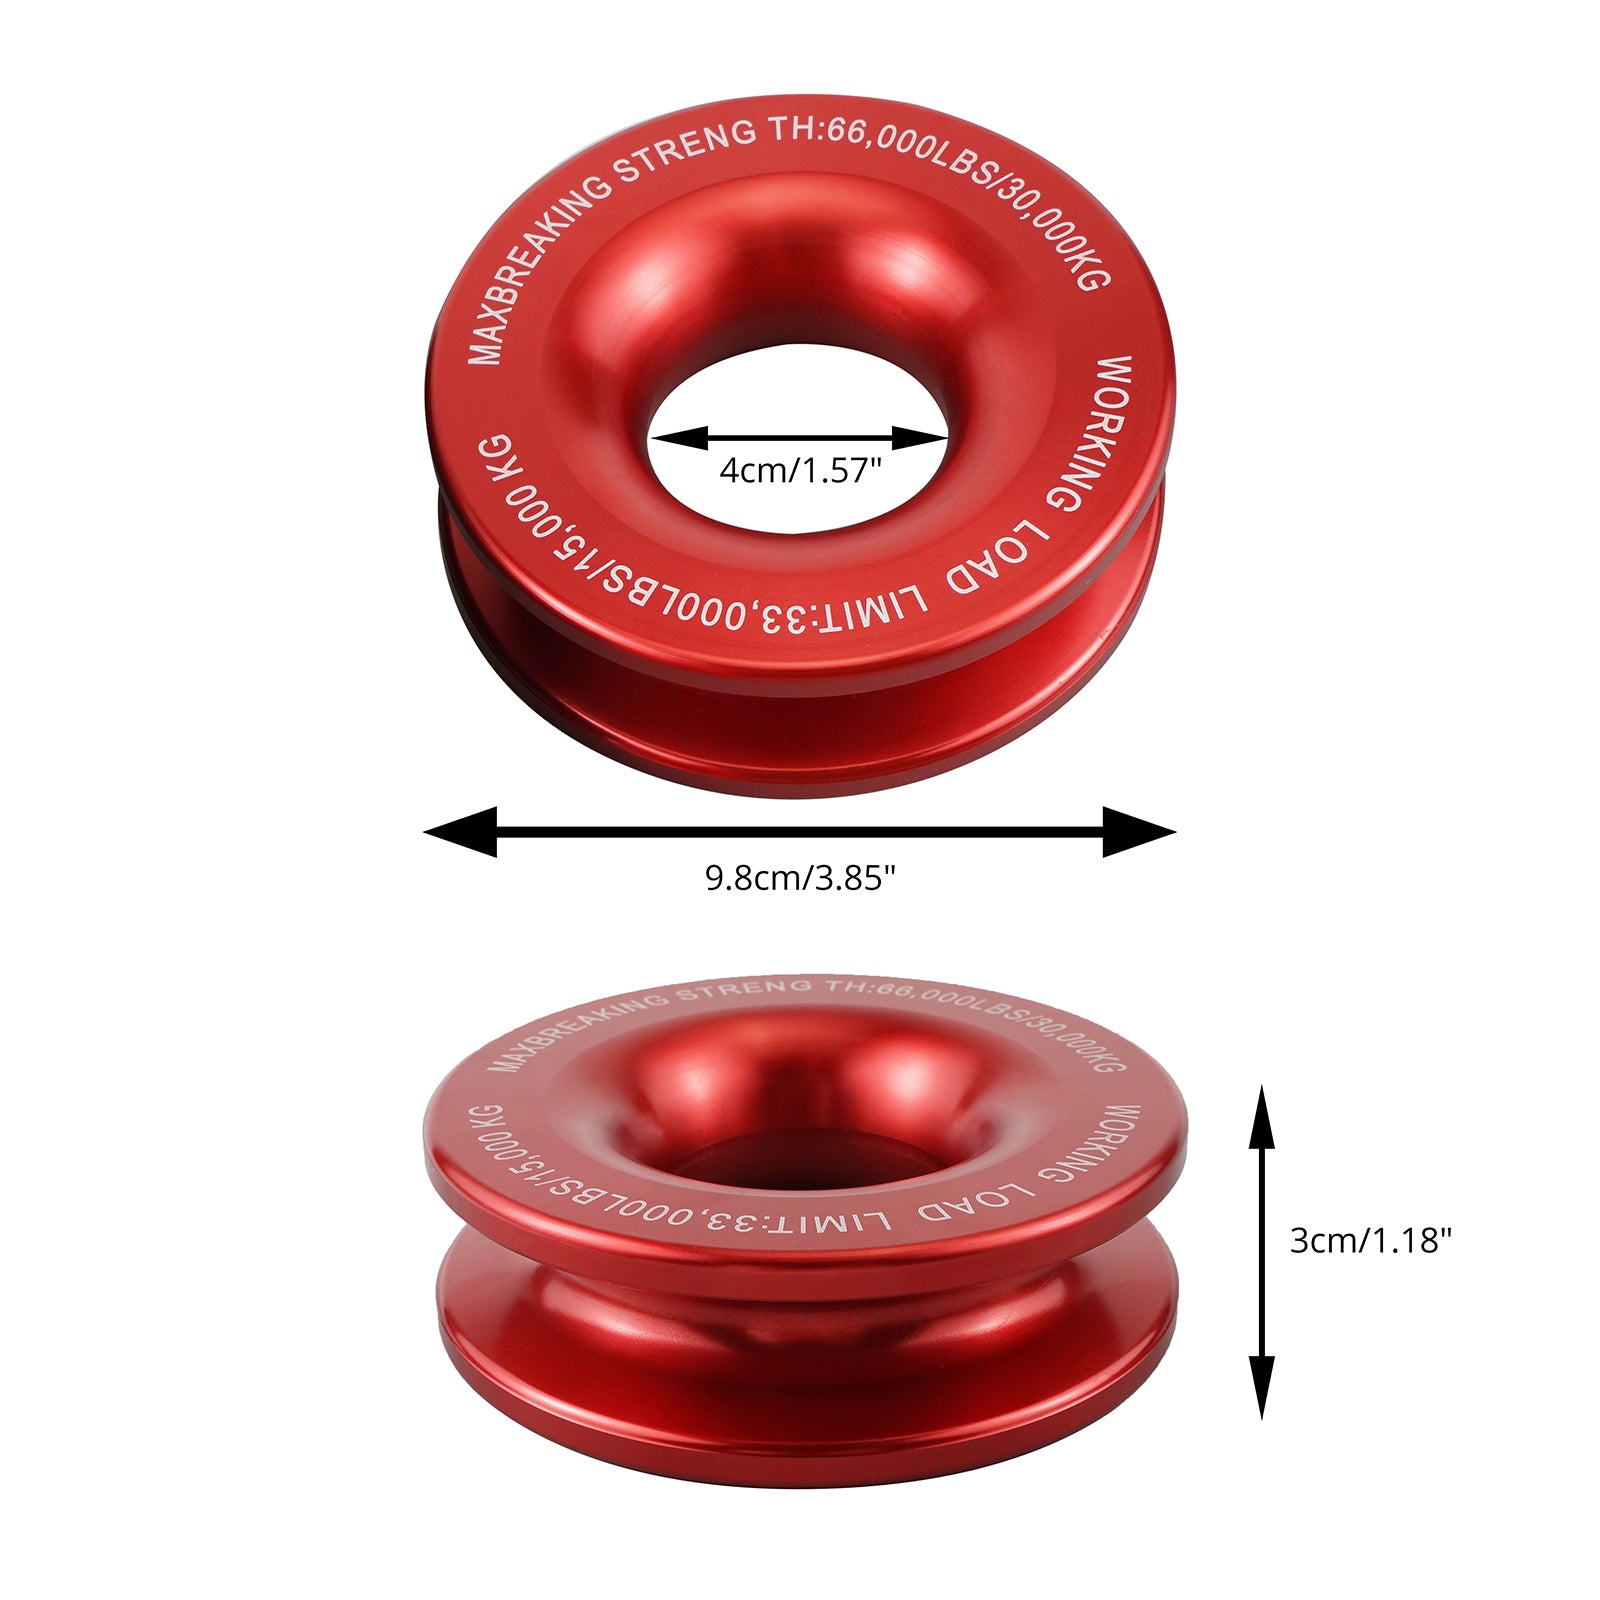 BEVINSEE Recovery Pulley Ring 30000 KG for Soft Shackle and Winch Rope 4WD Recovery Gear 4x4 Offroad